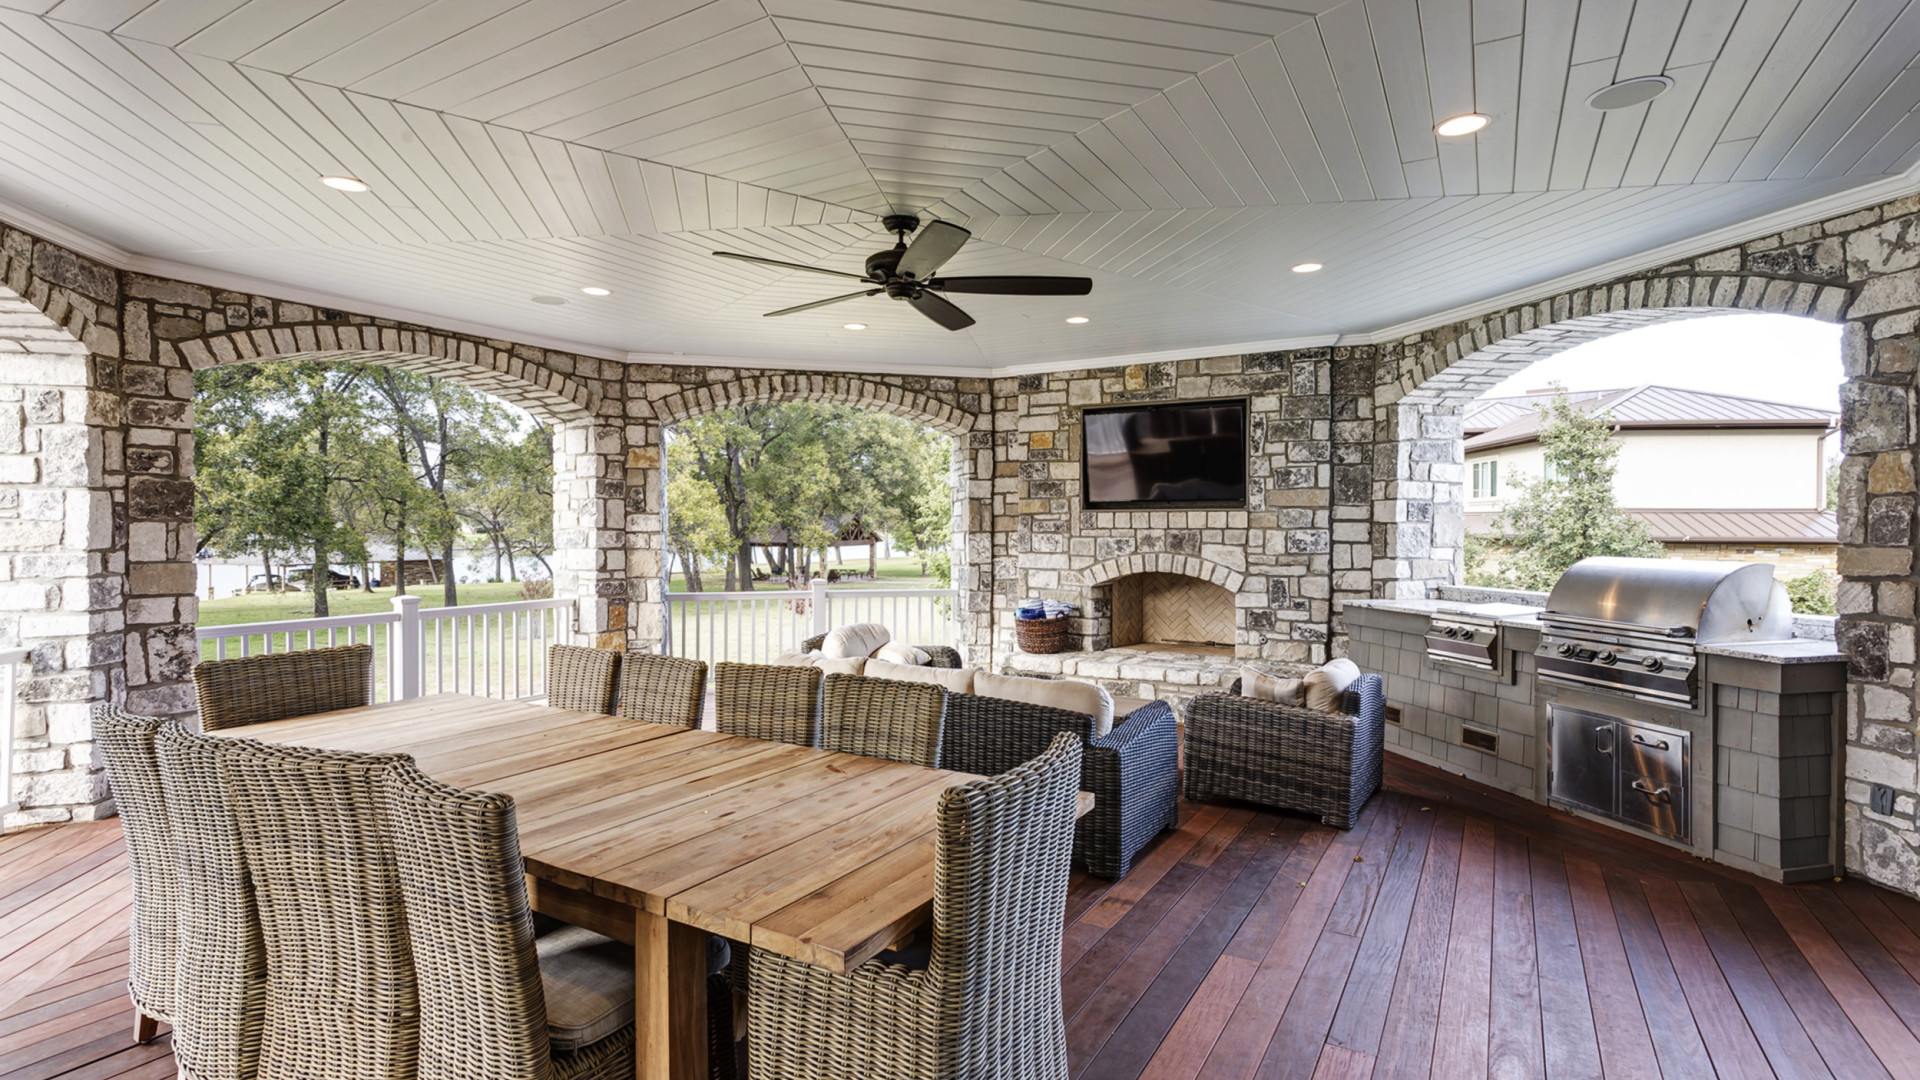 Custom outdoor oasis featuring a fireplace and built-in grill area, Lake LBJ TX